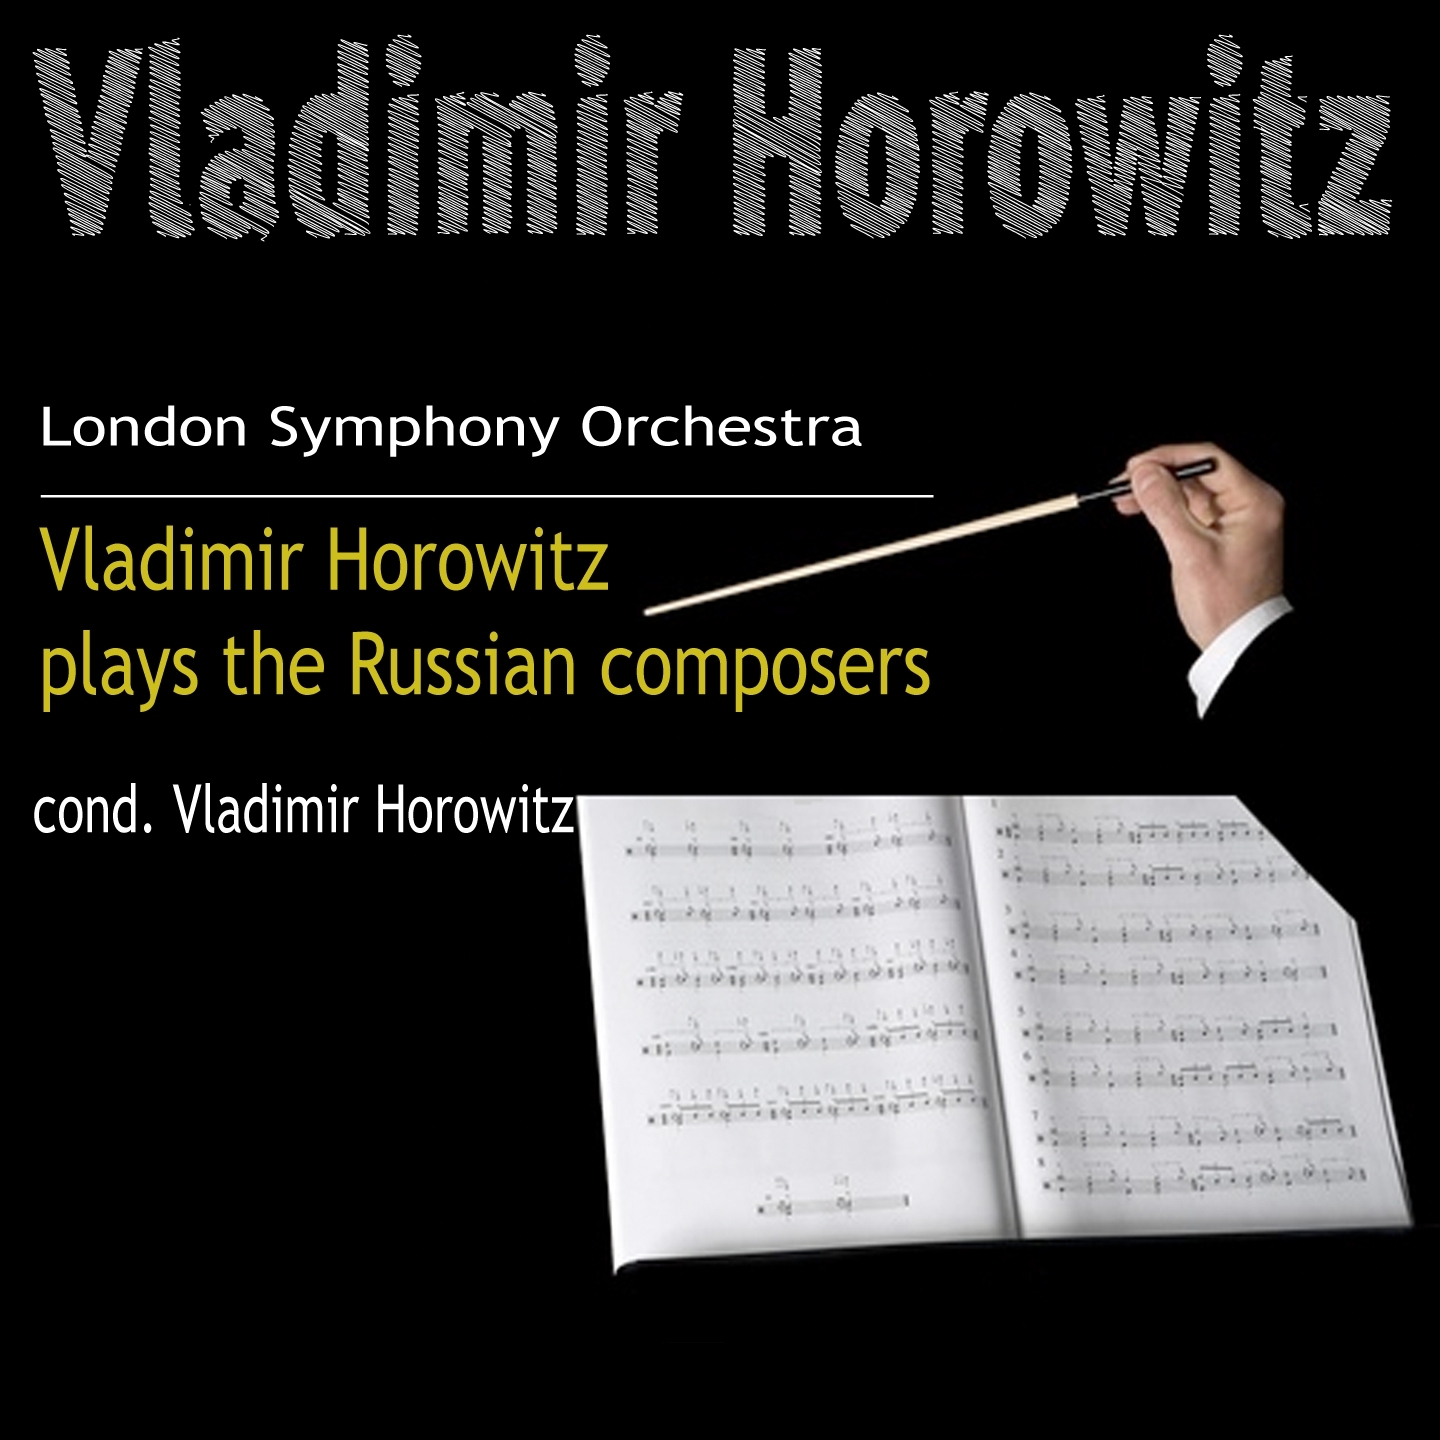 Vladimir Horowitz plays the Russian composers